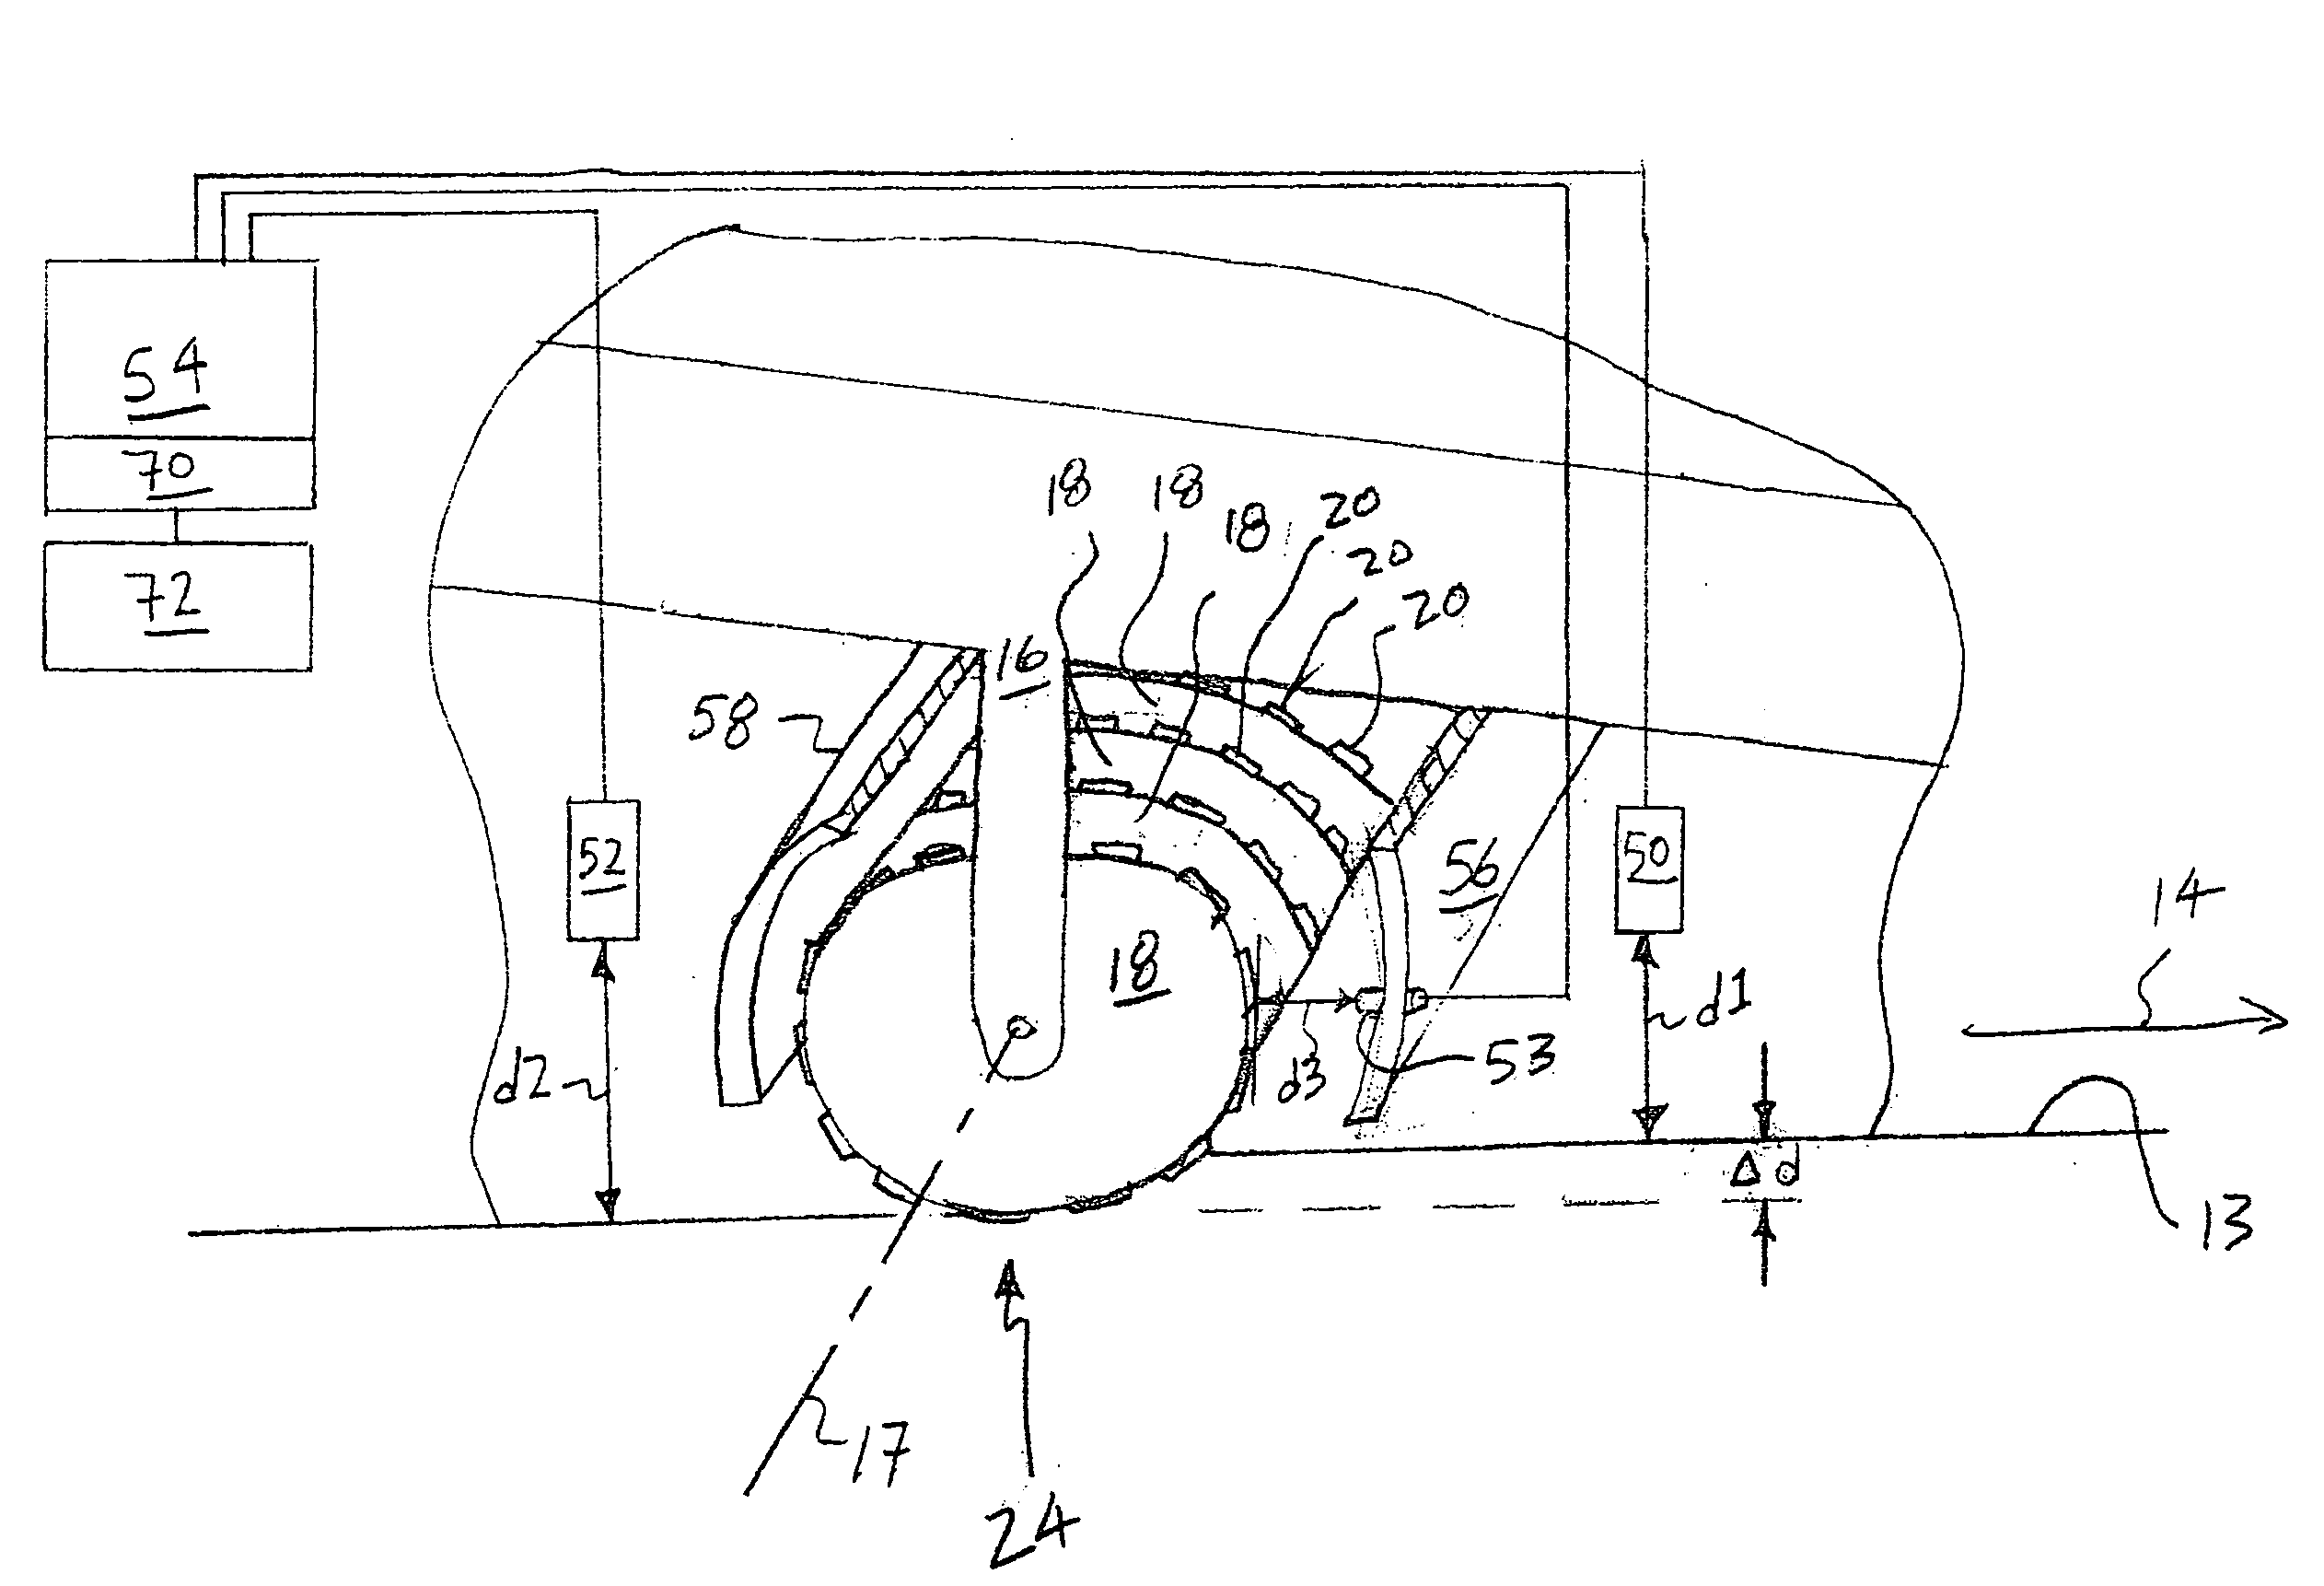 Roadway grinding/cutting apparatus and monitoring system